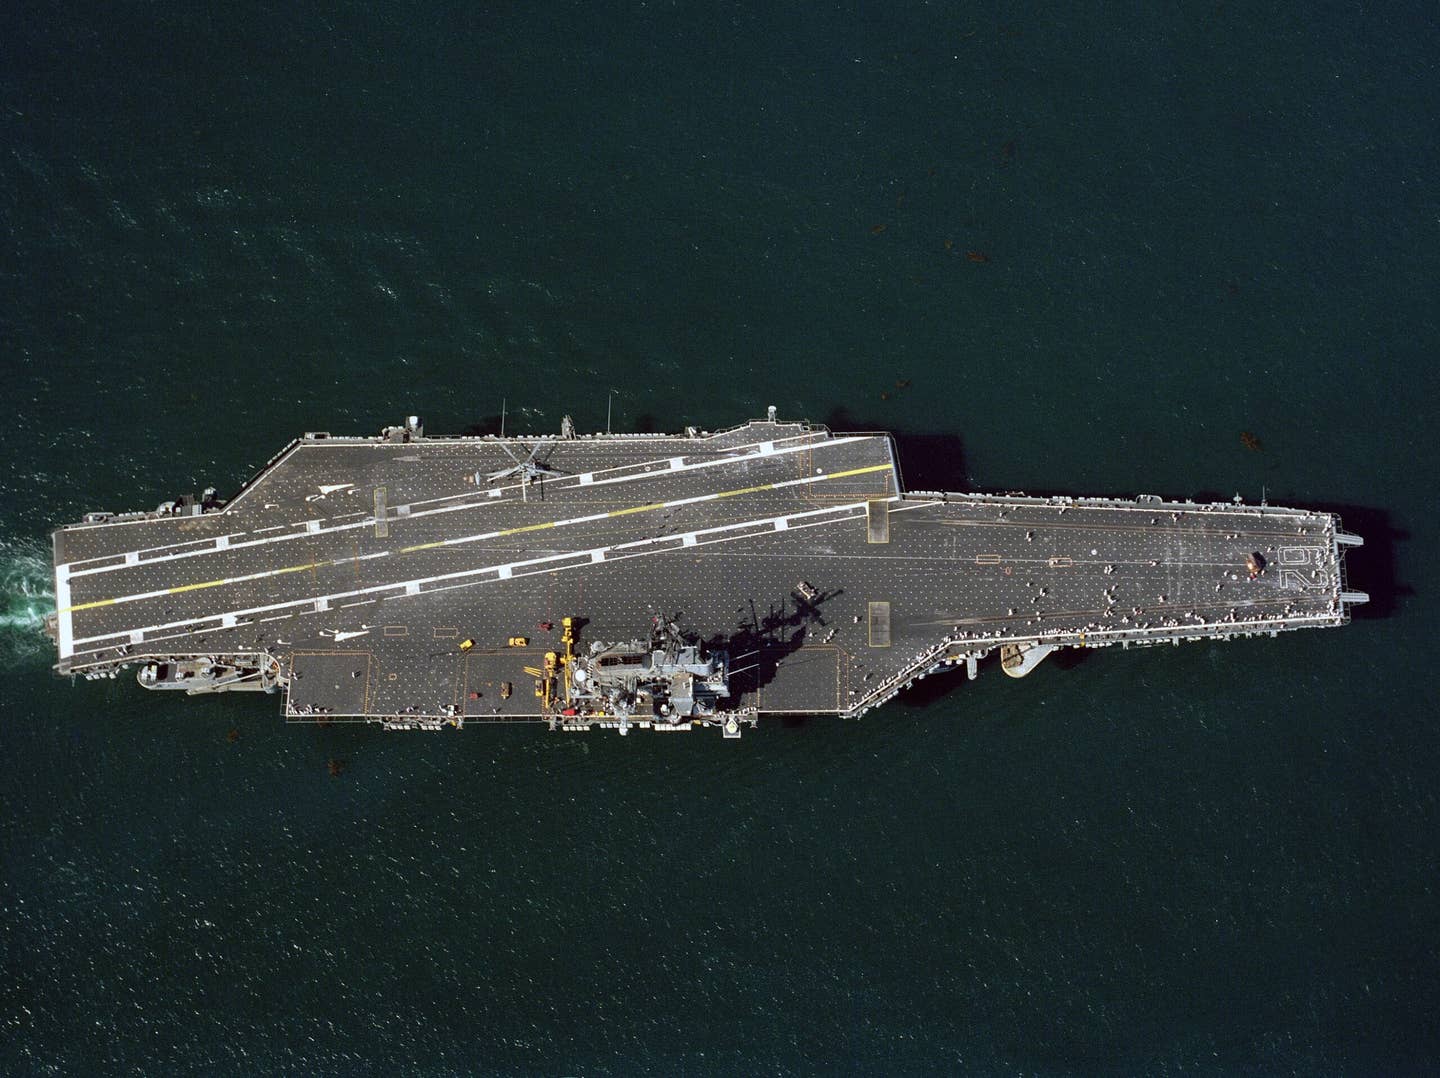 An overhead view of the aircraft carrier USS <em>Independence</em> (CV-62) underway to its home port of San Diego, California, post-SLEP, in October 1988. <em>U.S. Navy</em>